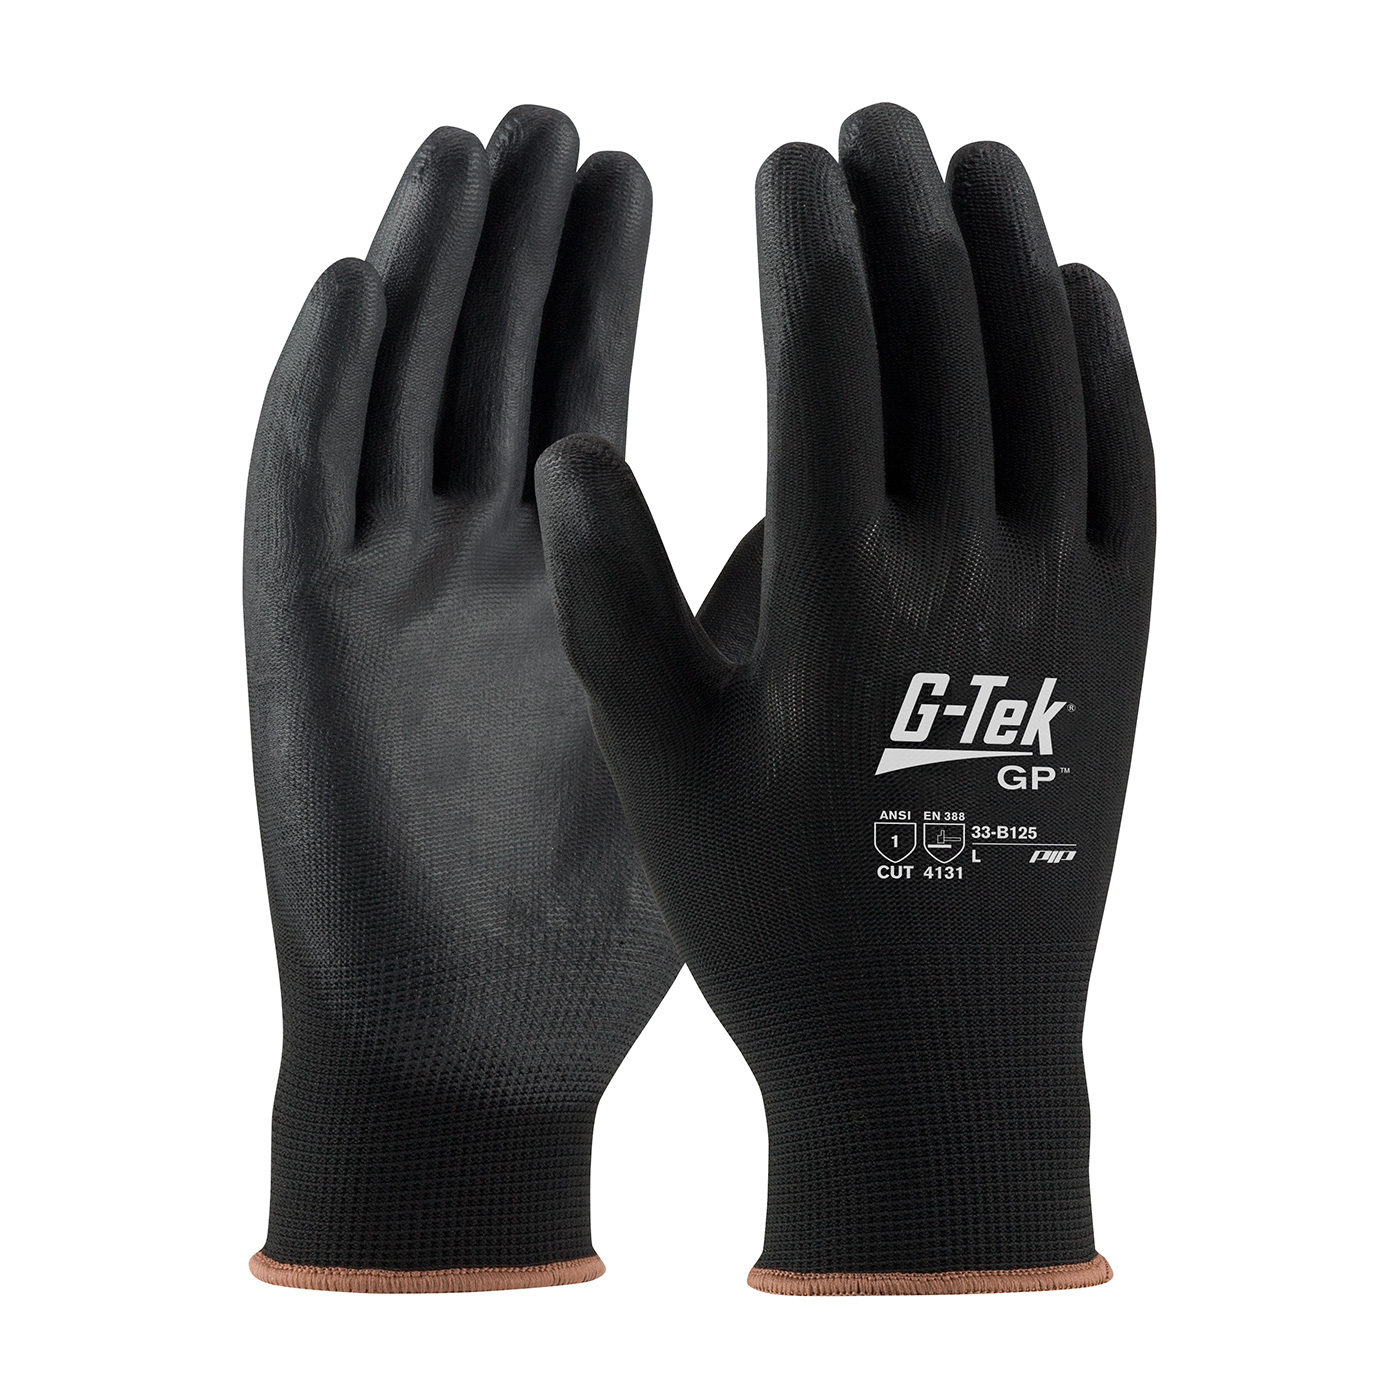 PIP 33-B125/XL G-Tek GP Hi-Vis Seamless Knit Polyester Glove with Polyurethane Coated Smooth Grip on Palm & Fingers - X-Large PID-33 B125 XL